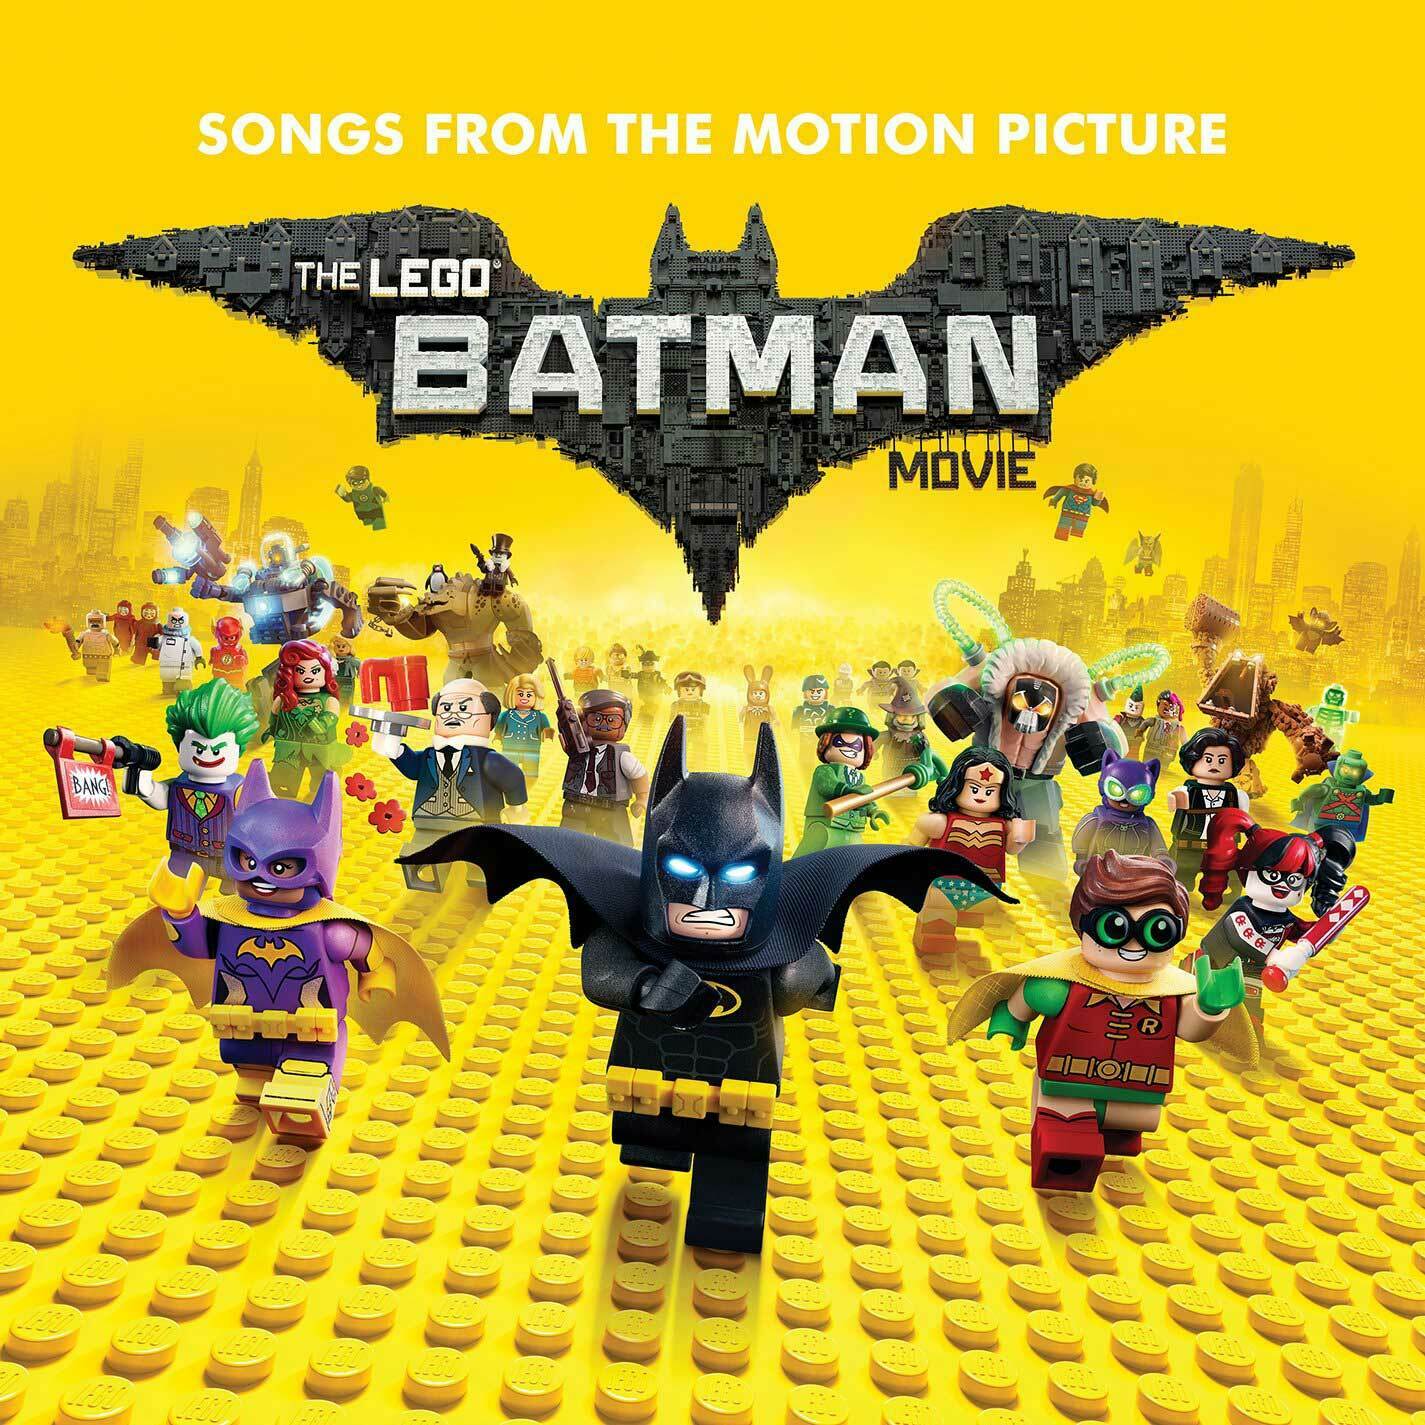 The Lego Batman Movie: Songs From The Motion Picture